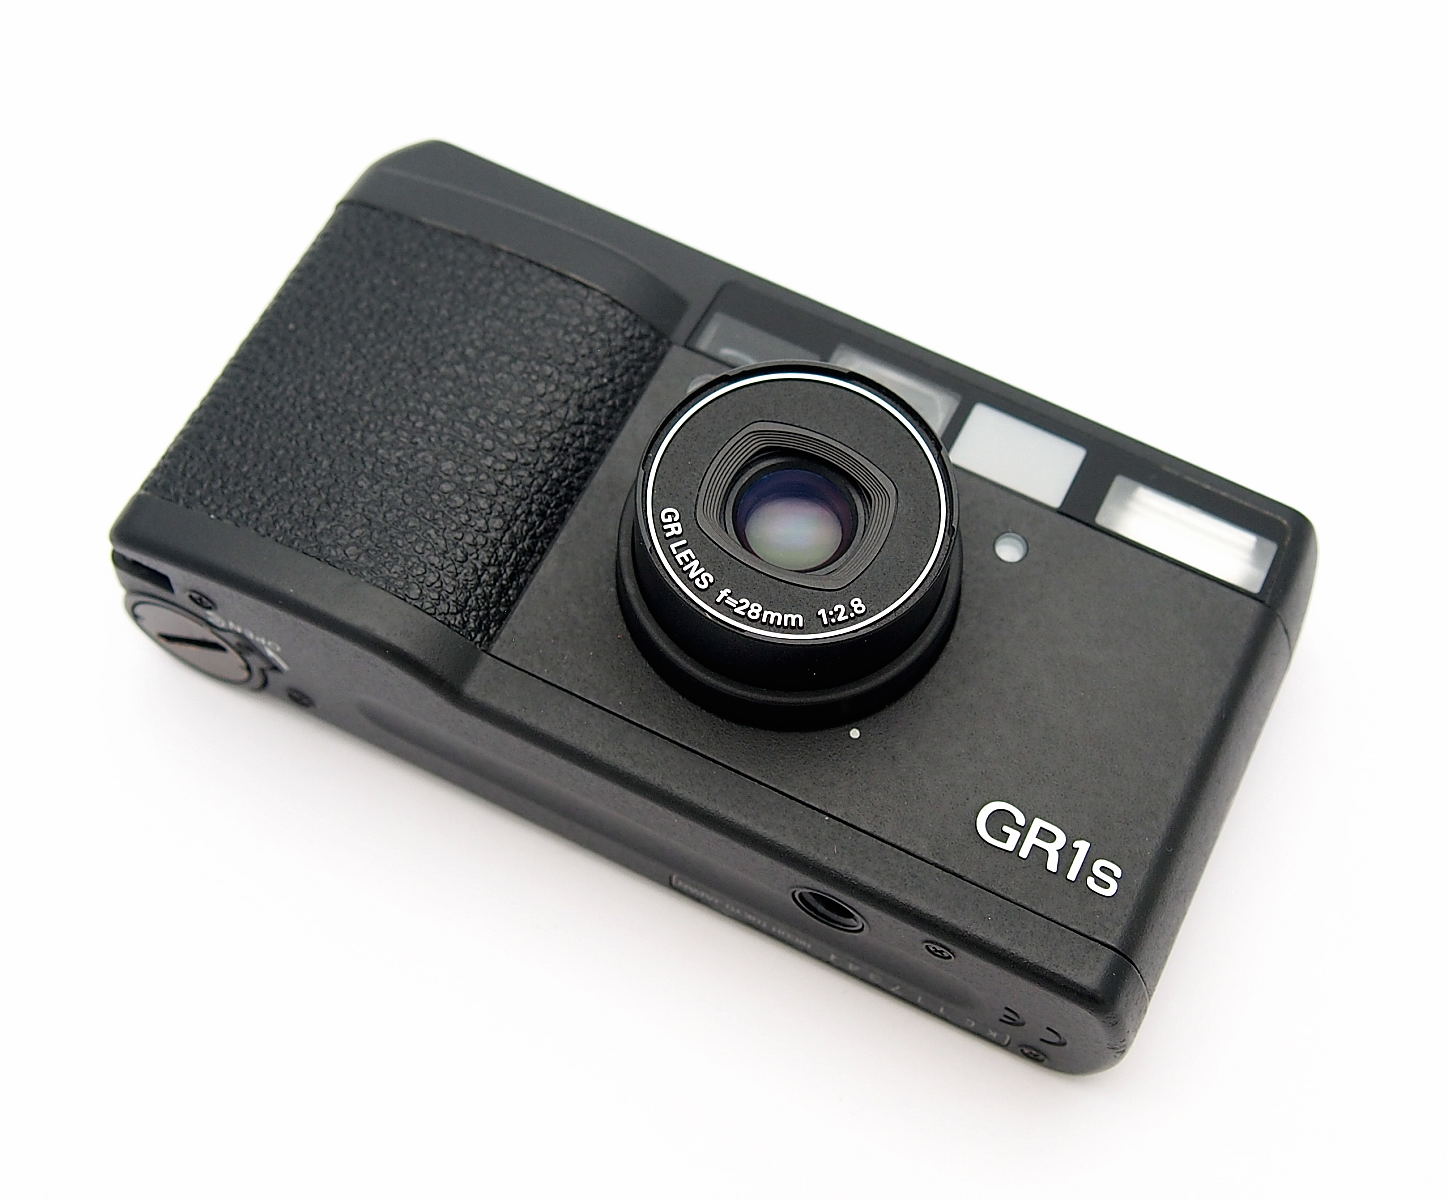 Ricoh GR1s Date 35mm Point & Shoot with 28mm F2.8 Lens #9683